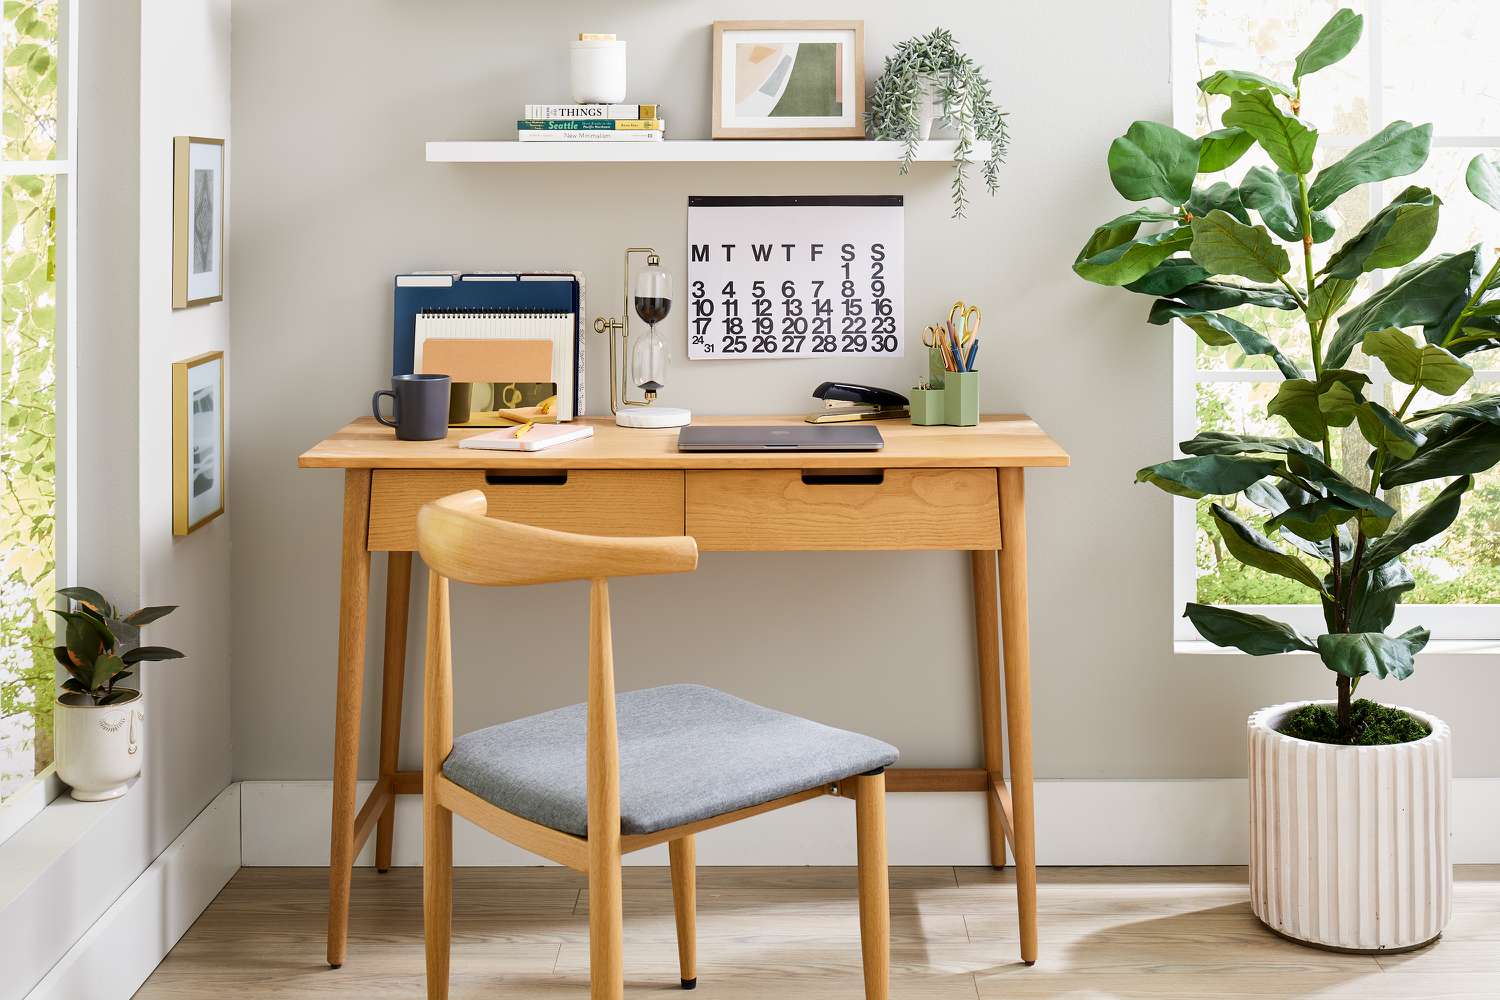  Choosing the Perfect Design Study Table and Desk for Your Home Office